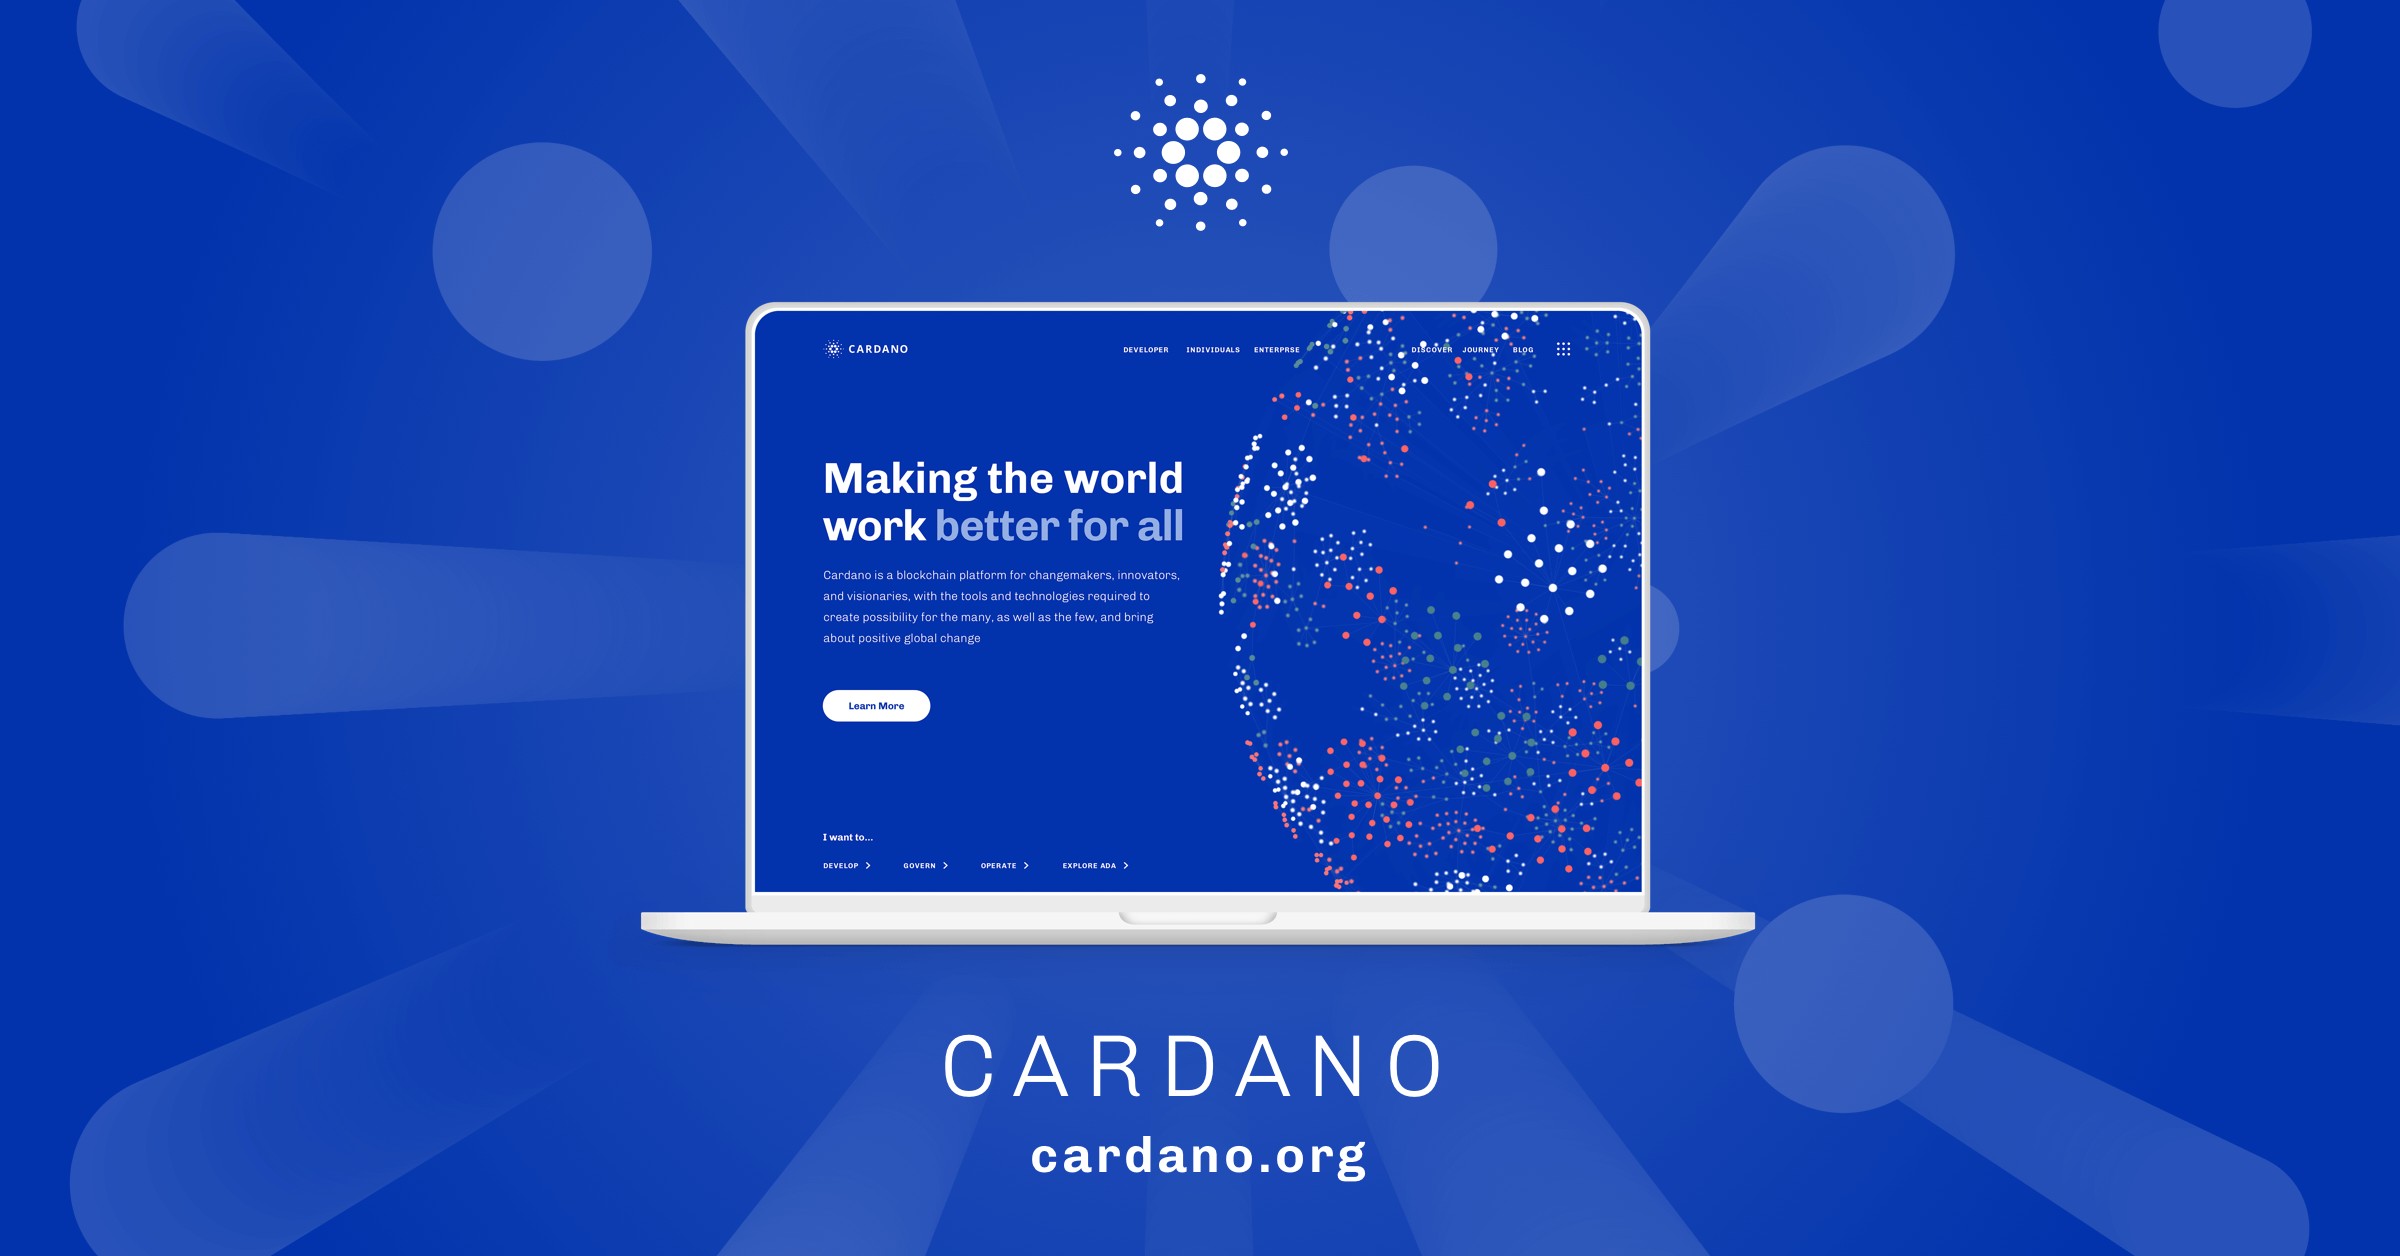 Cardano is a decentralized public blockchain and cryptocurrency project and is fully open source.